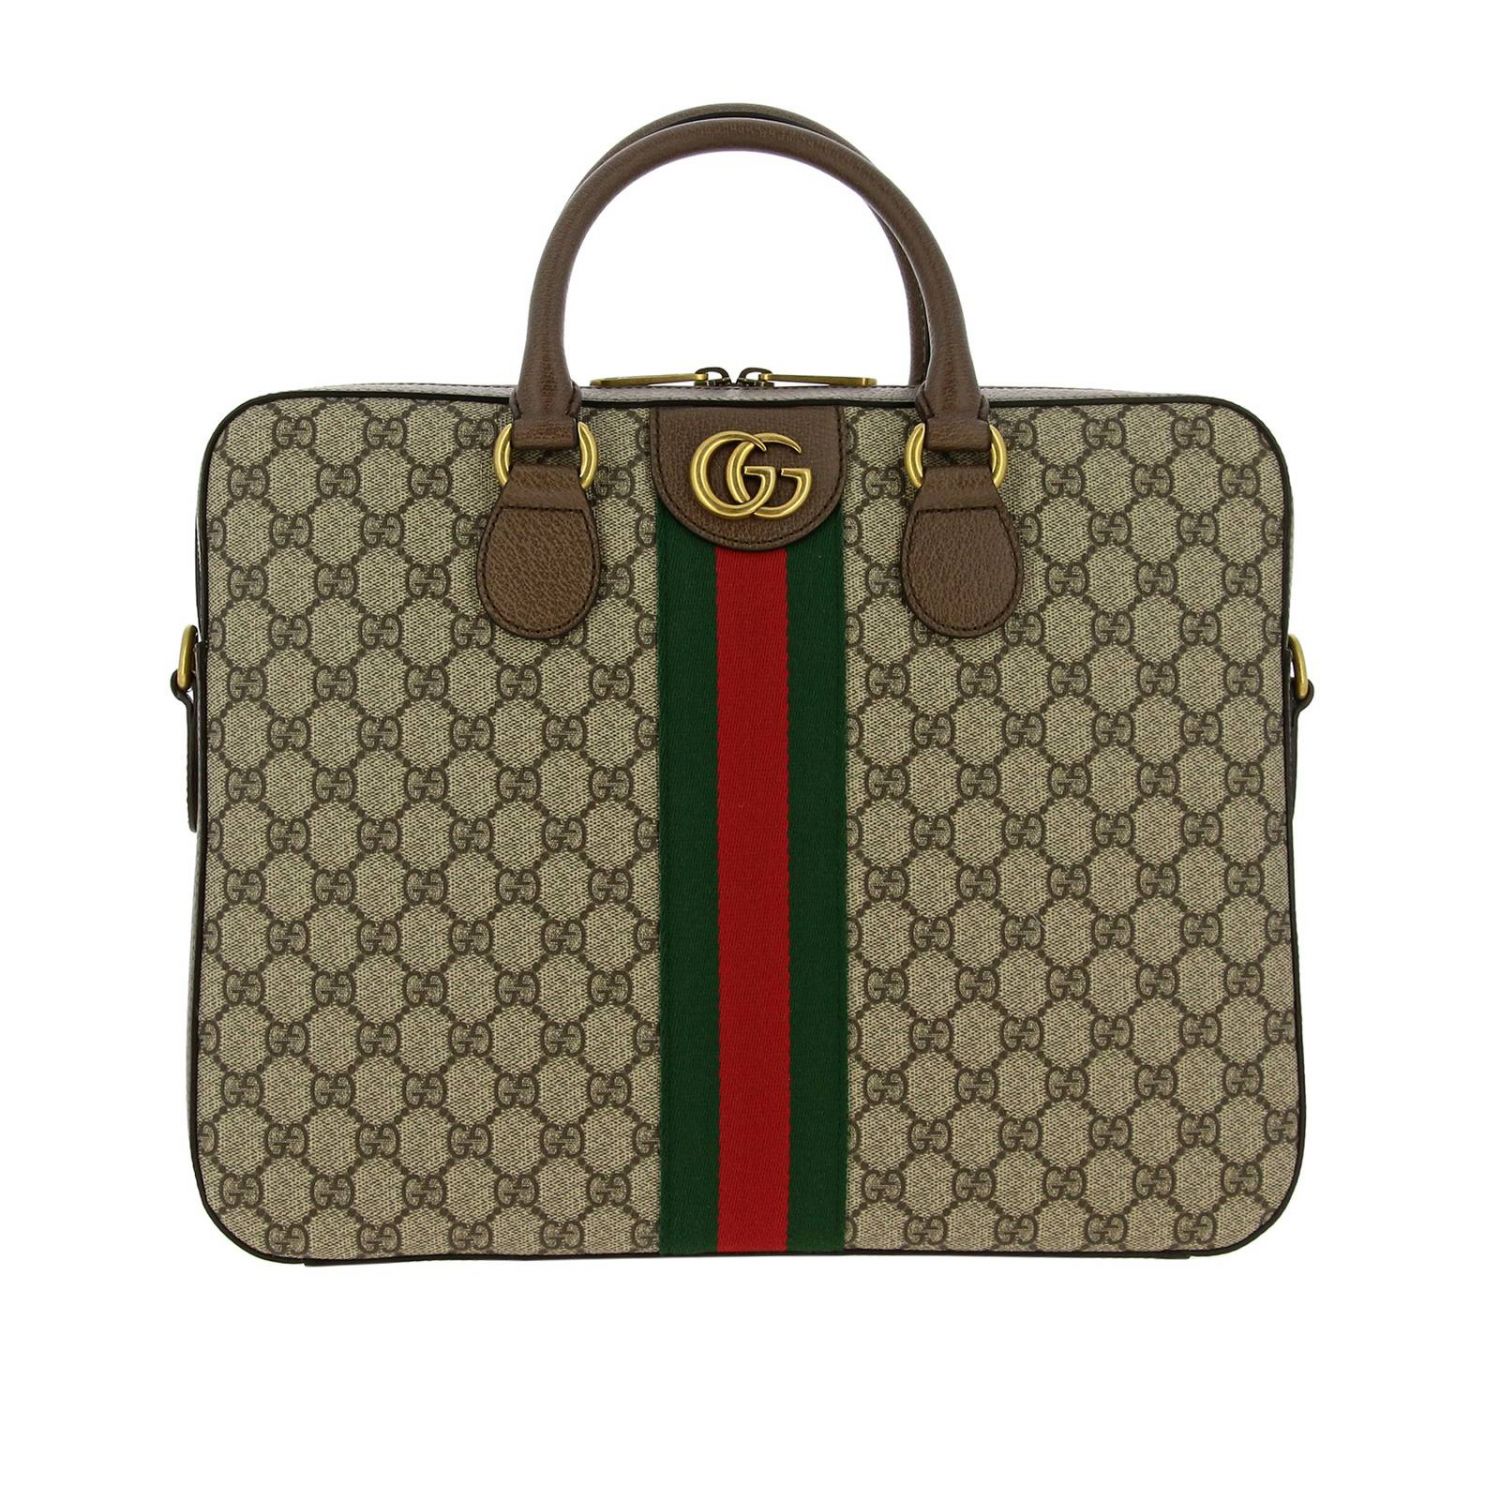 GUCCI: Ophidia Briefcase with GG Supreme monogram | Bags Gucci Men Beige | Bags Gucci 574793